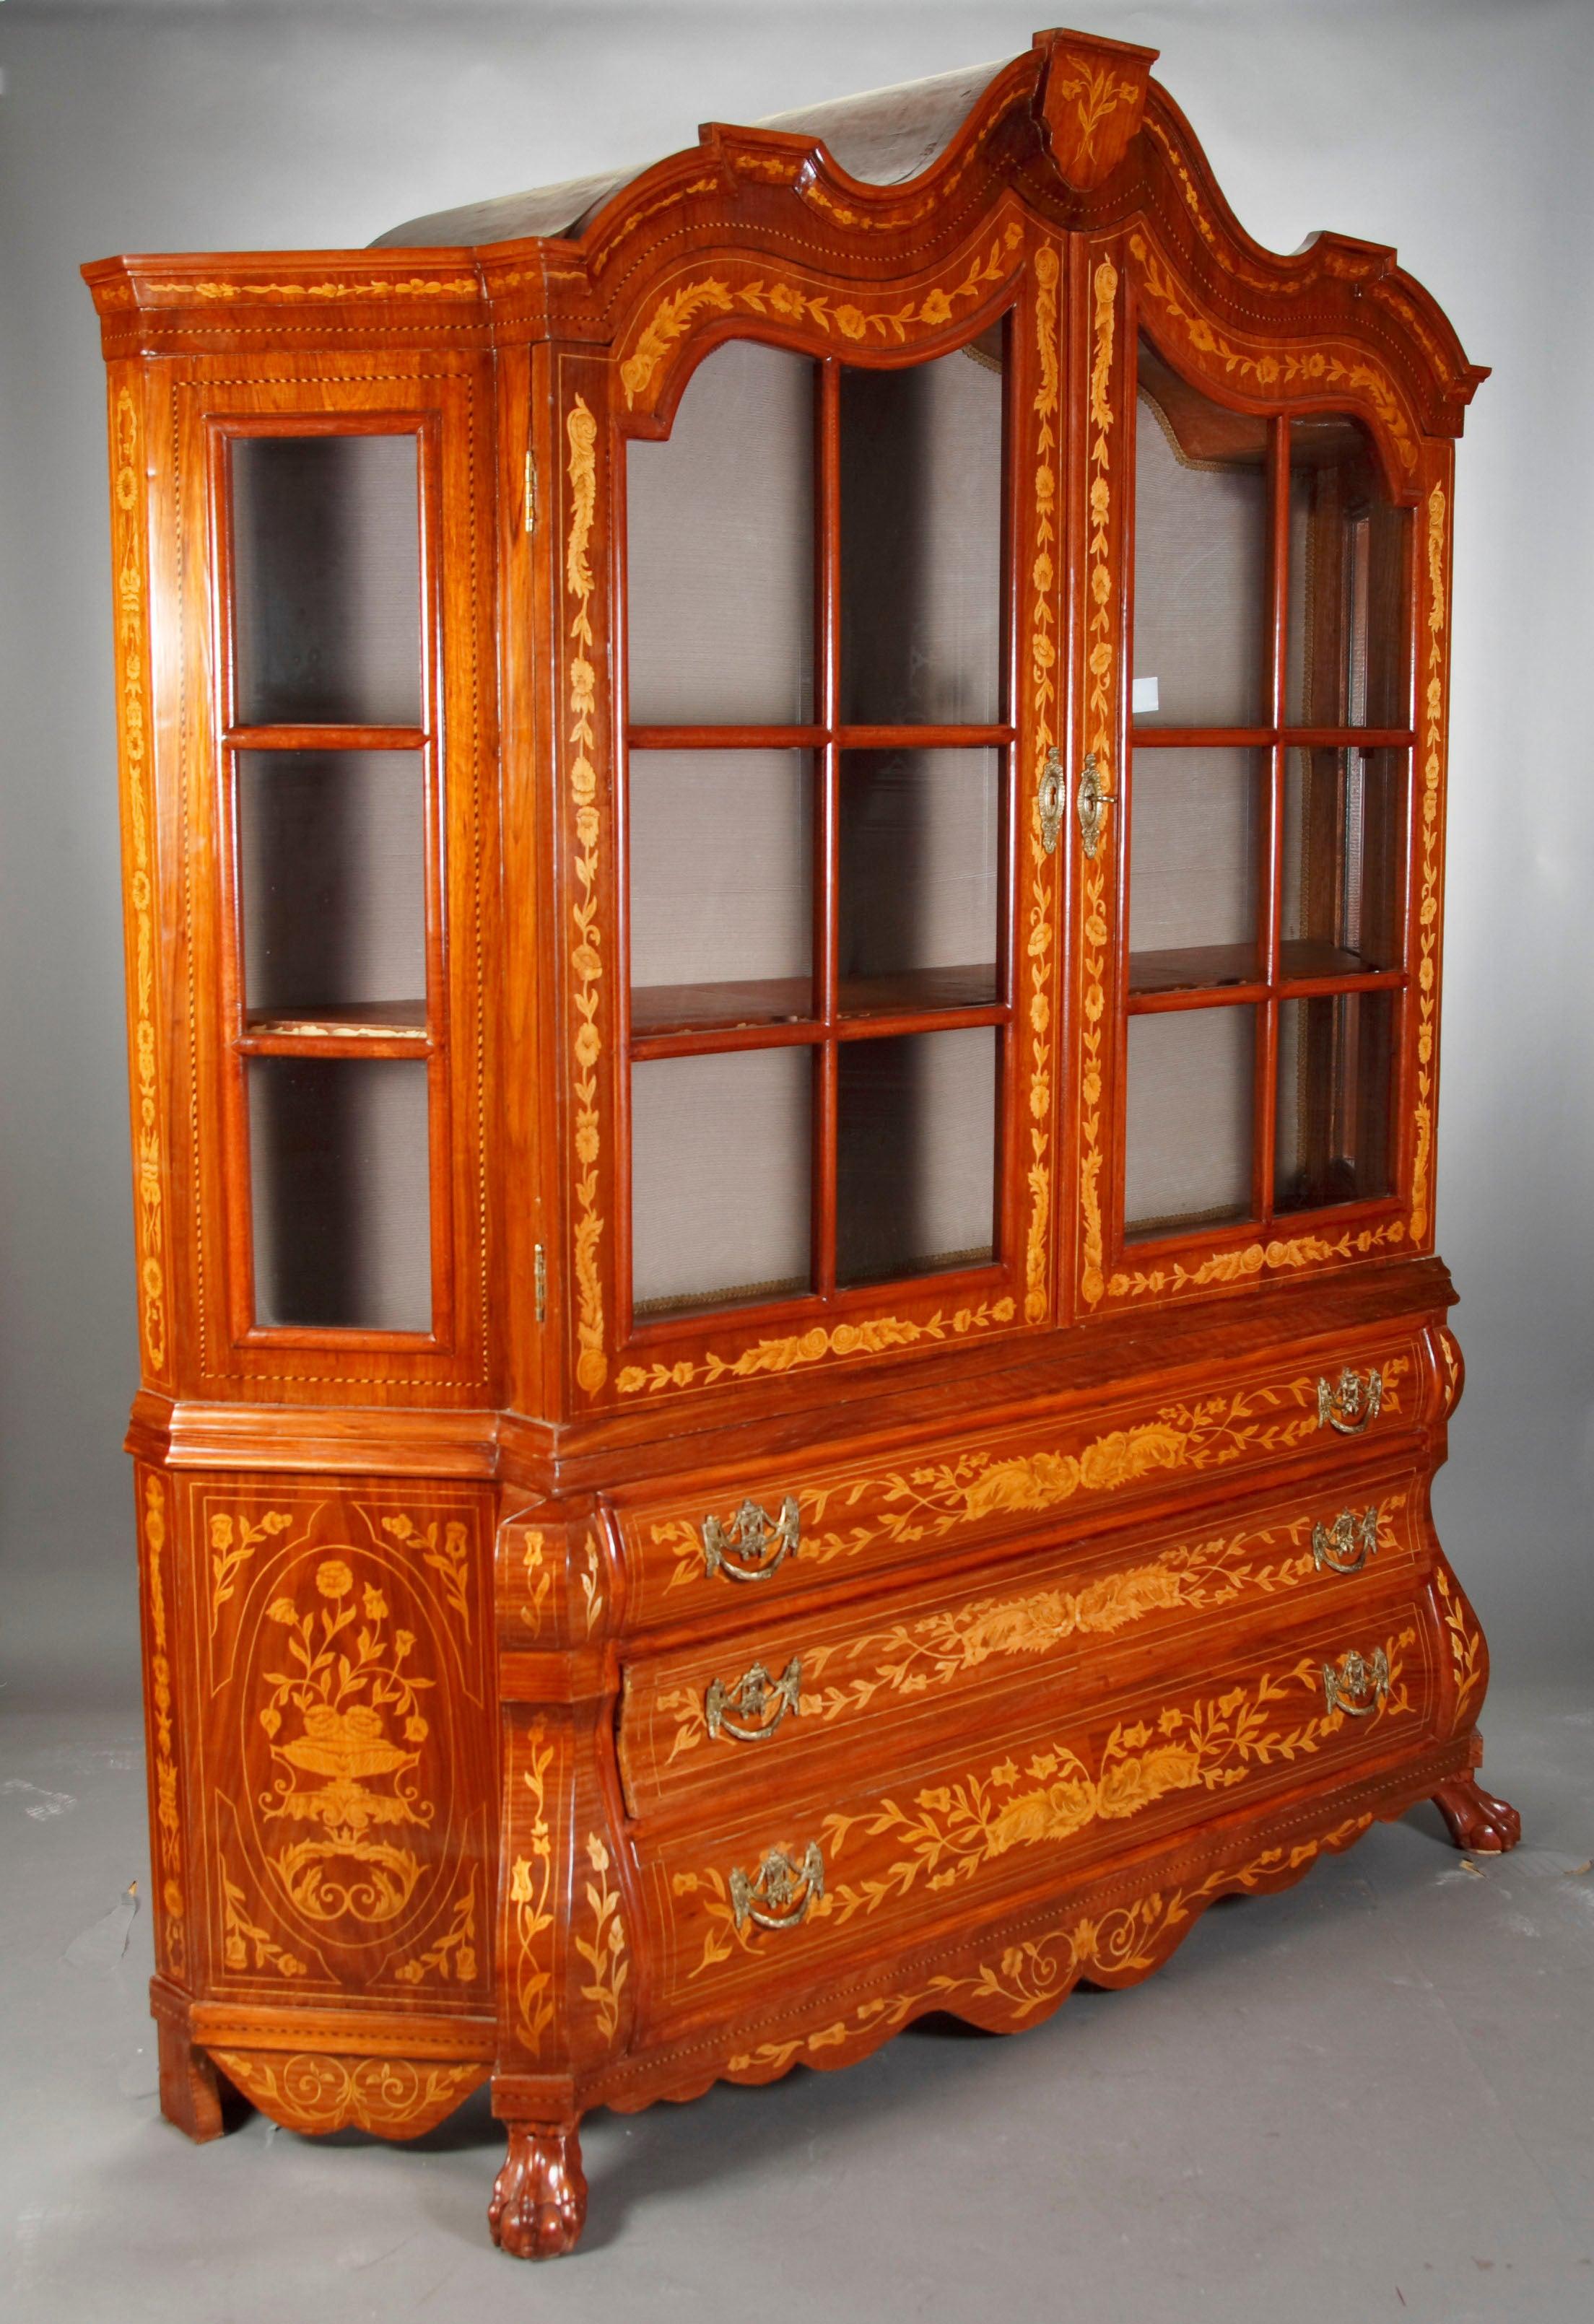 Veneer Vitrine with Inlay Made of Mahogany and Maple in the Dutch Baroque Style